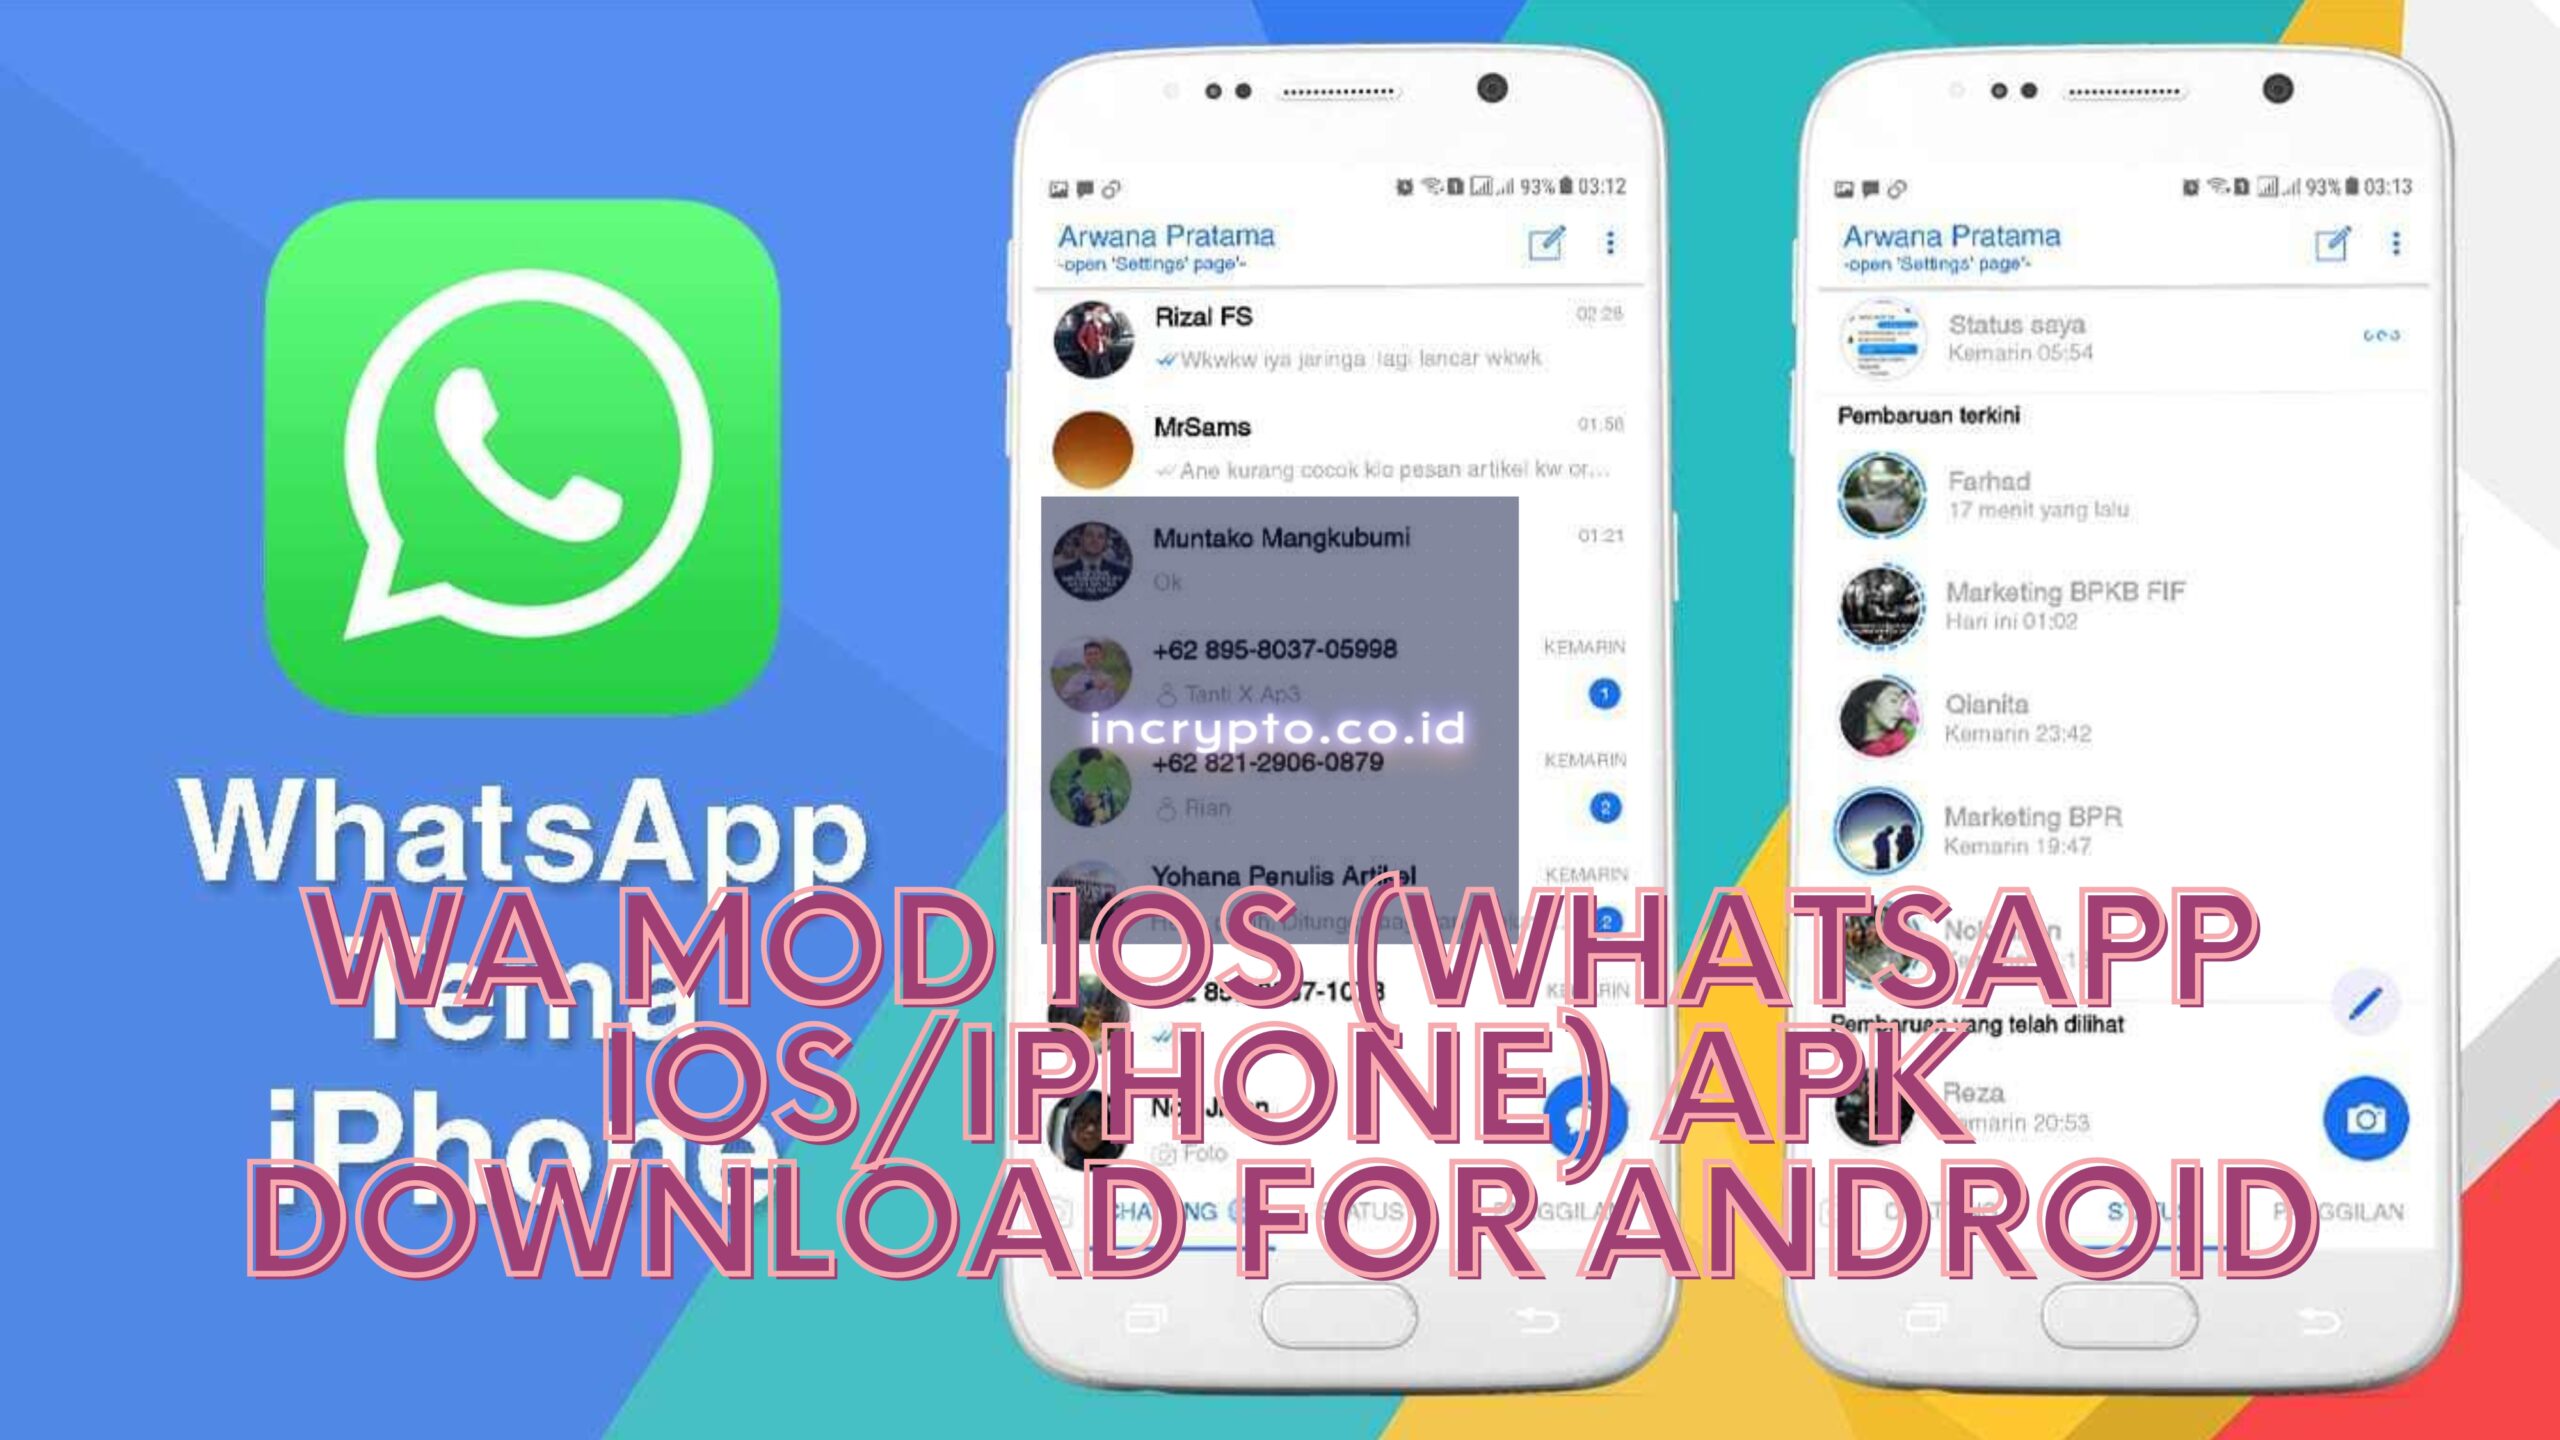 WA MOD iOS (WhatsApp iOSiPhone) Apk Download For Android